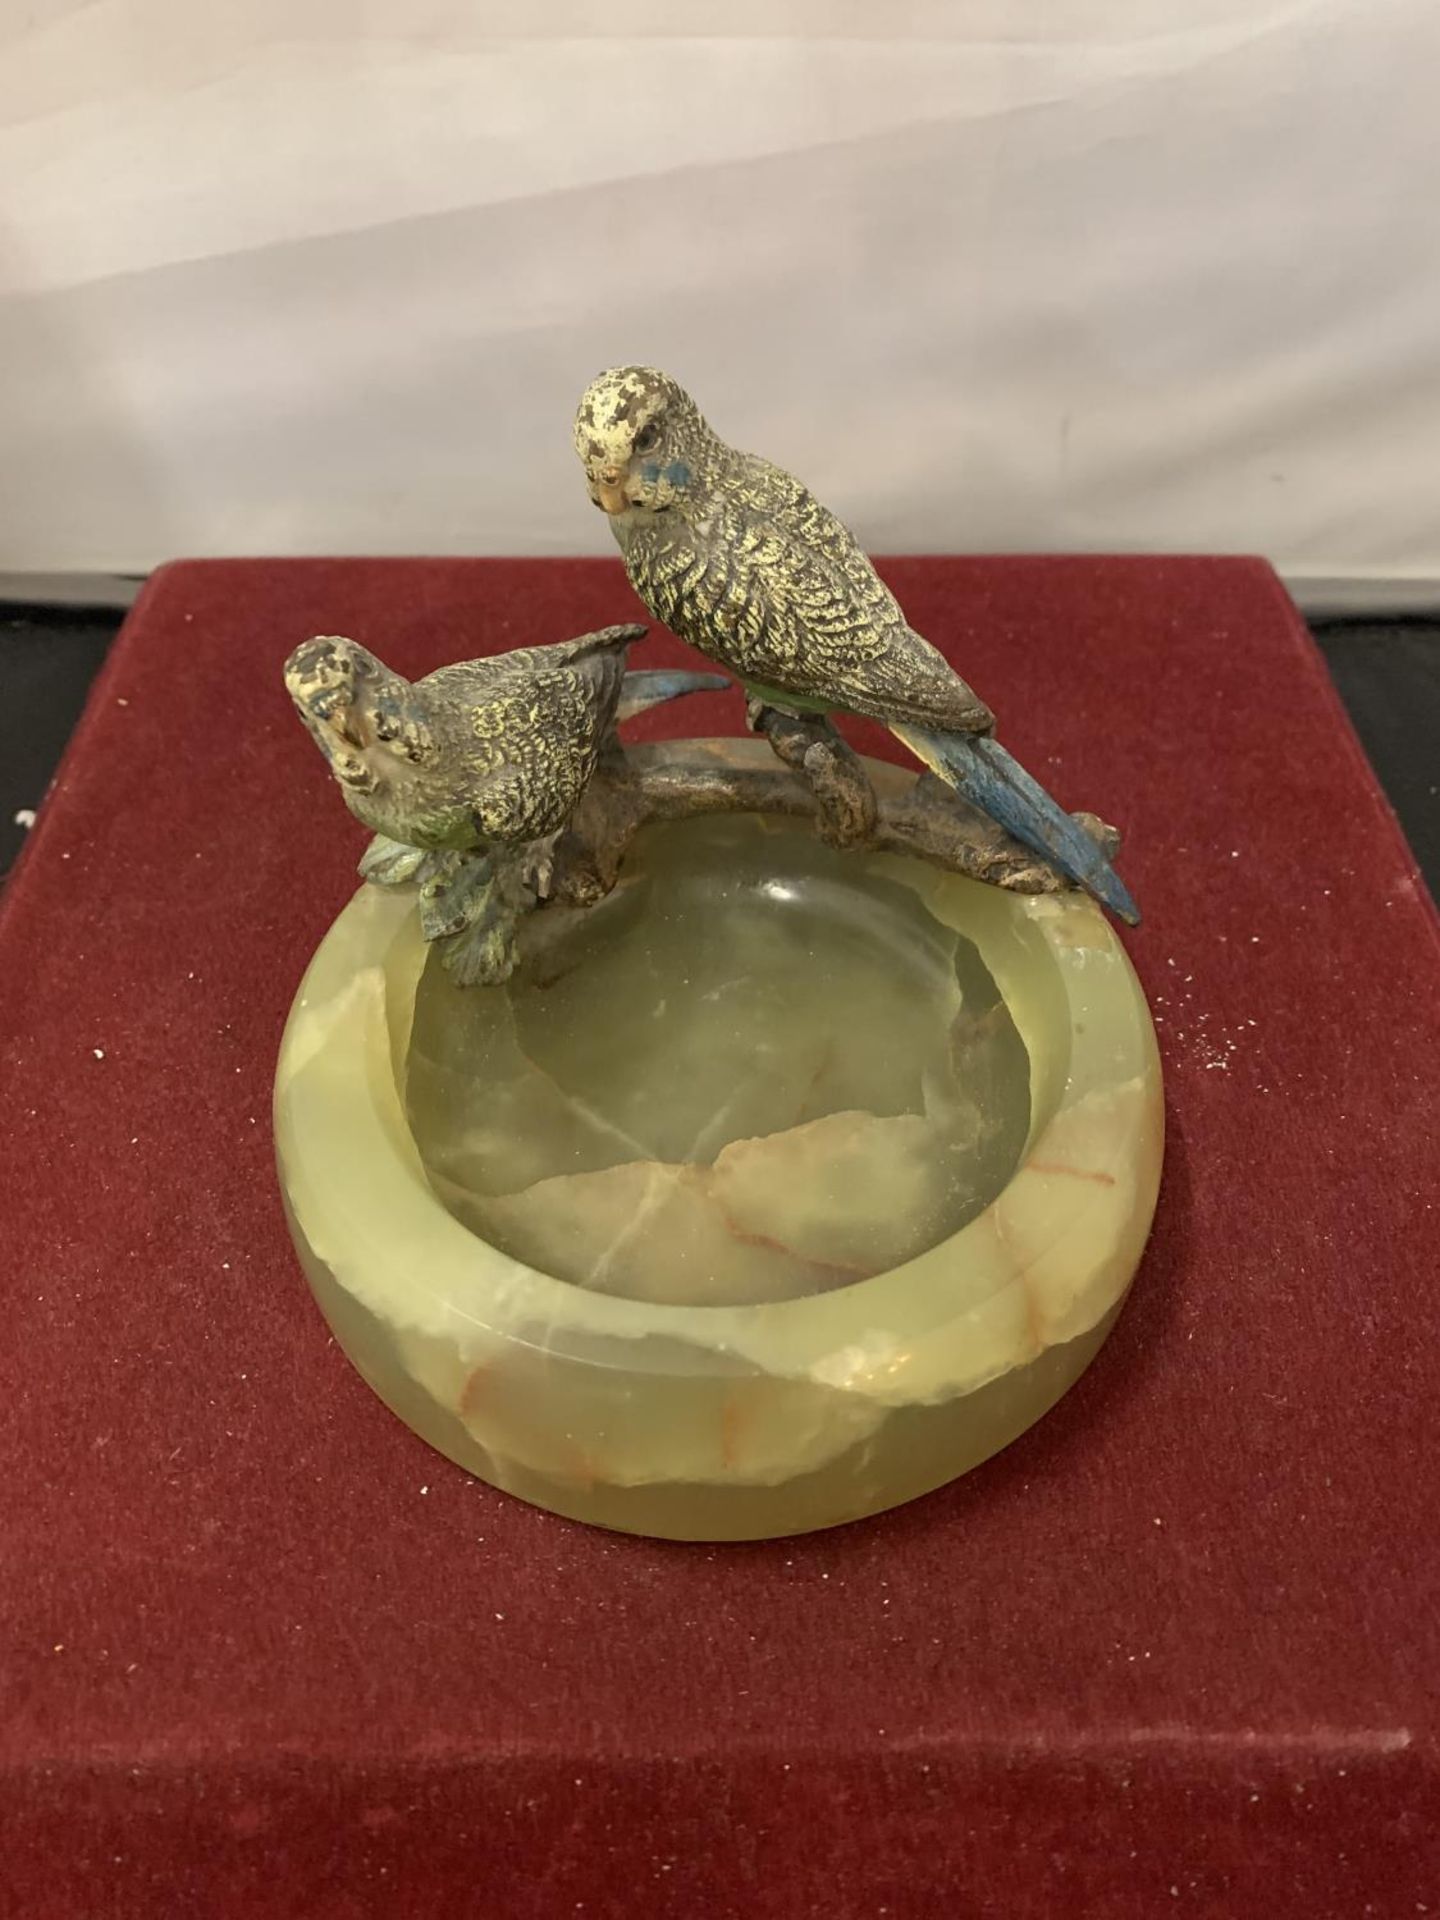 AN ONYX DISH WITH A PAIR OF COLD PAINTED BRONZE PARAKEET FIGURES D:11CM H: 9.5CM - Image 2 of 4